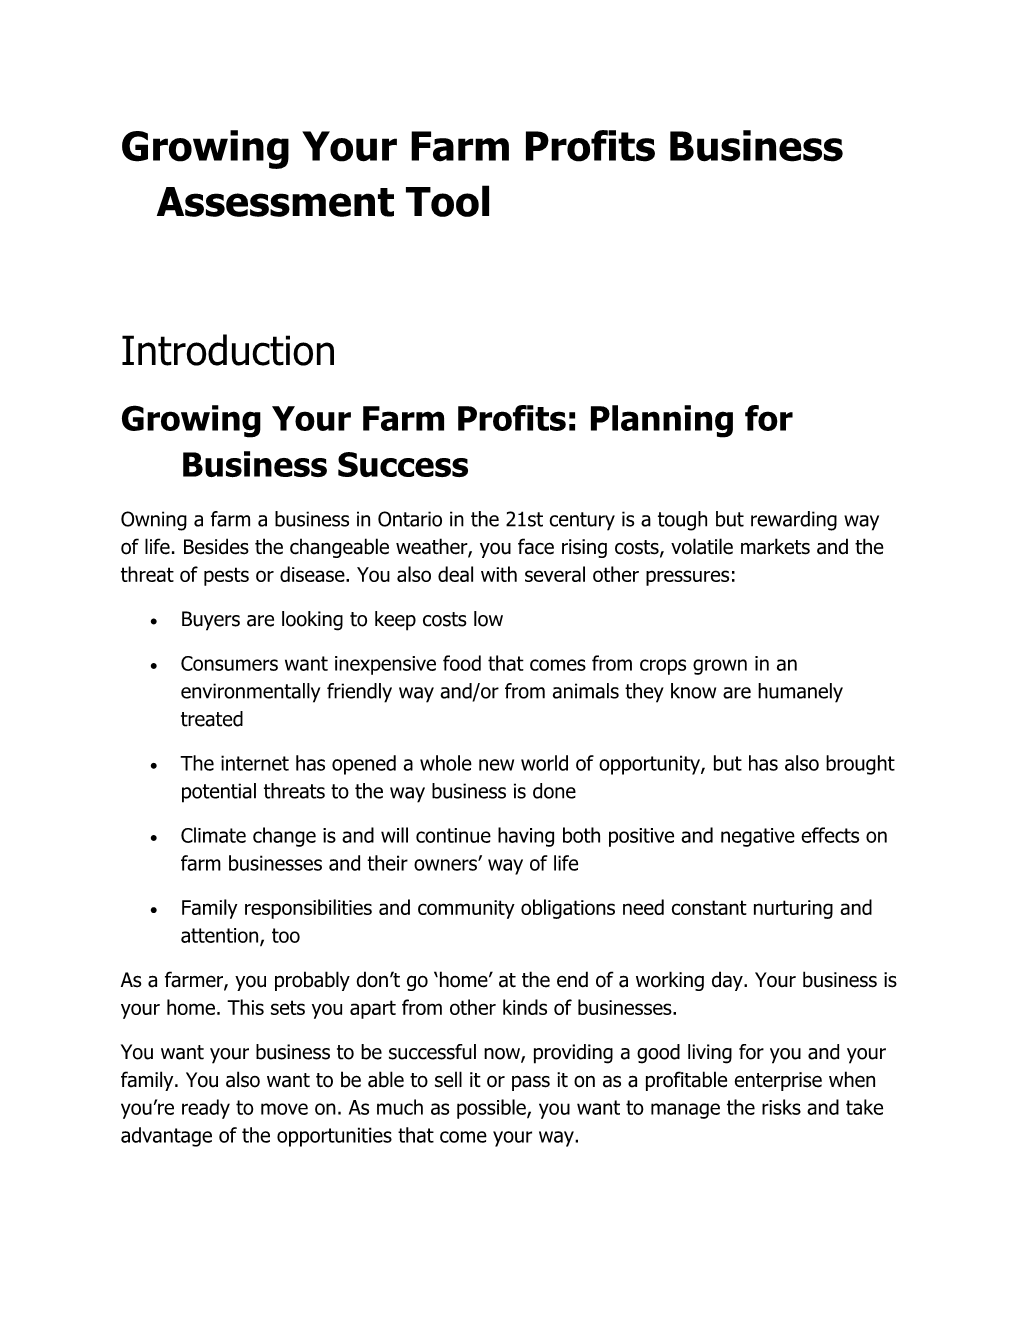 Growing Your Farm Profits Business Assessment Tool